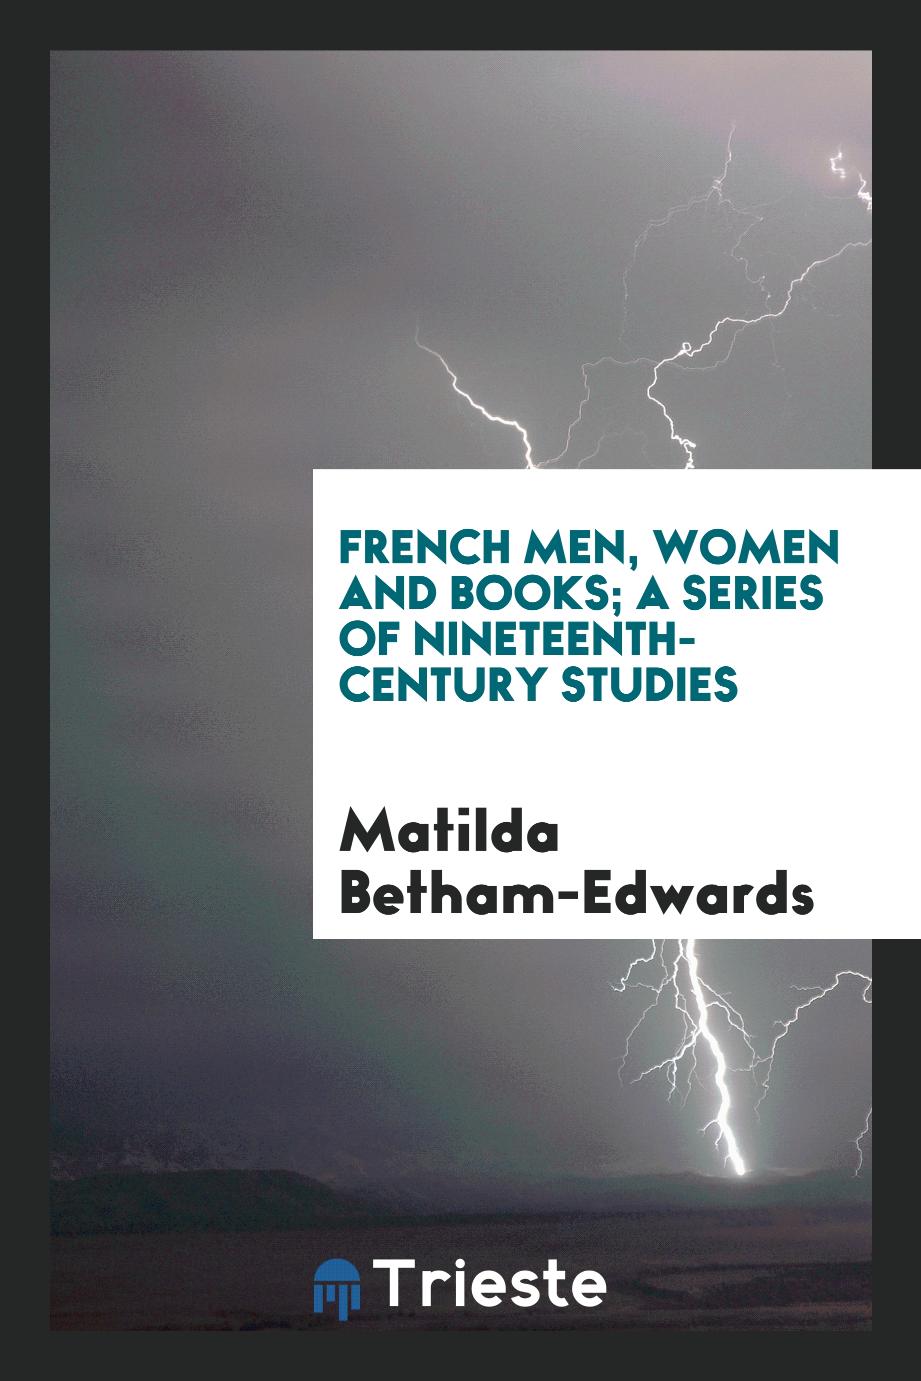 French men, women and books; a series of nineteenth-century studies